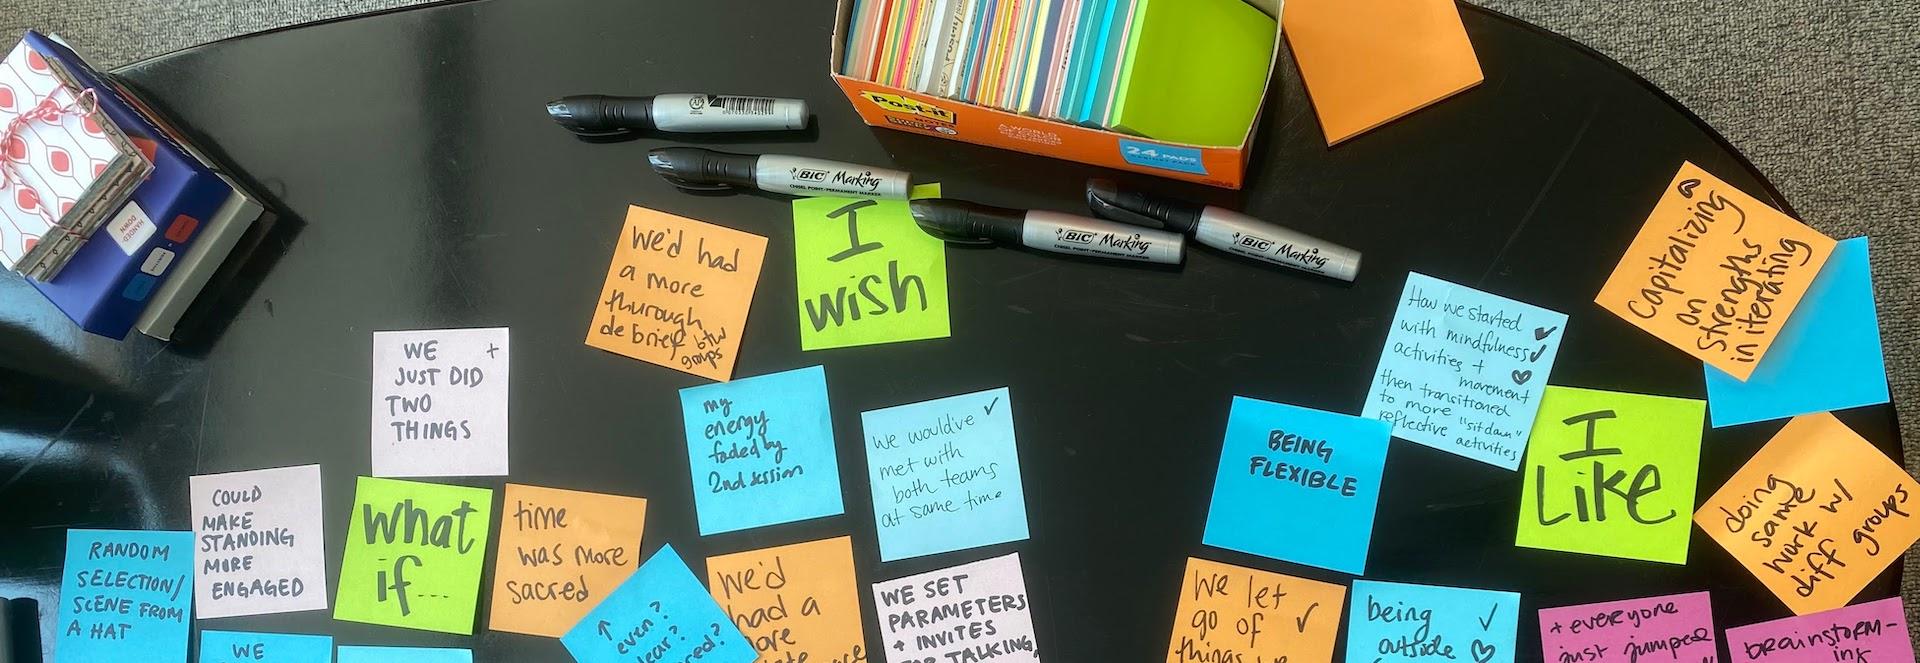 Post-its and markers on a table